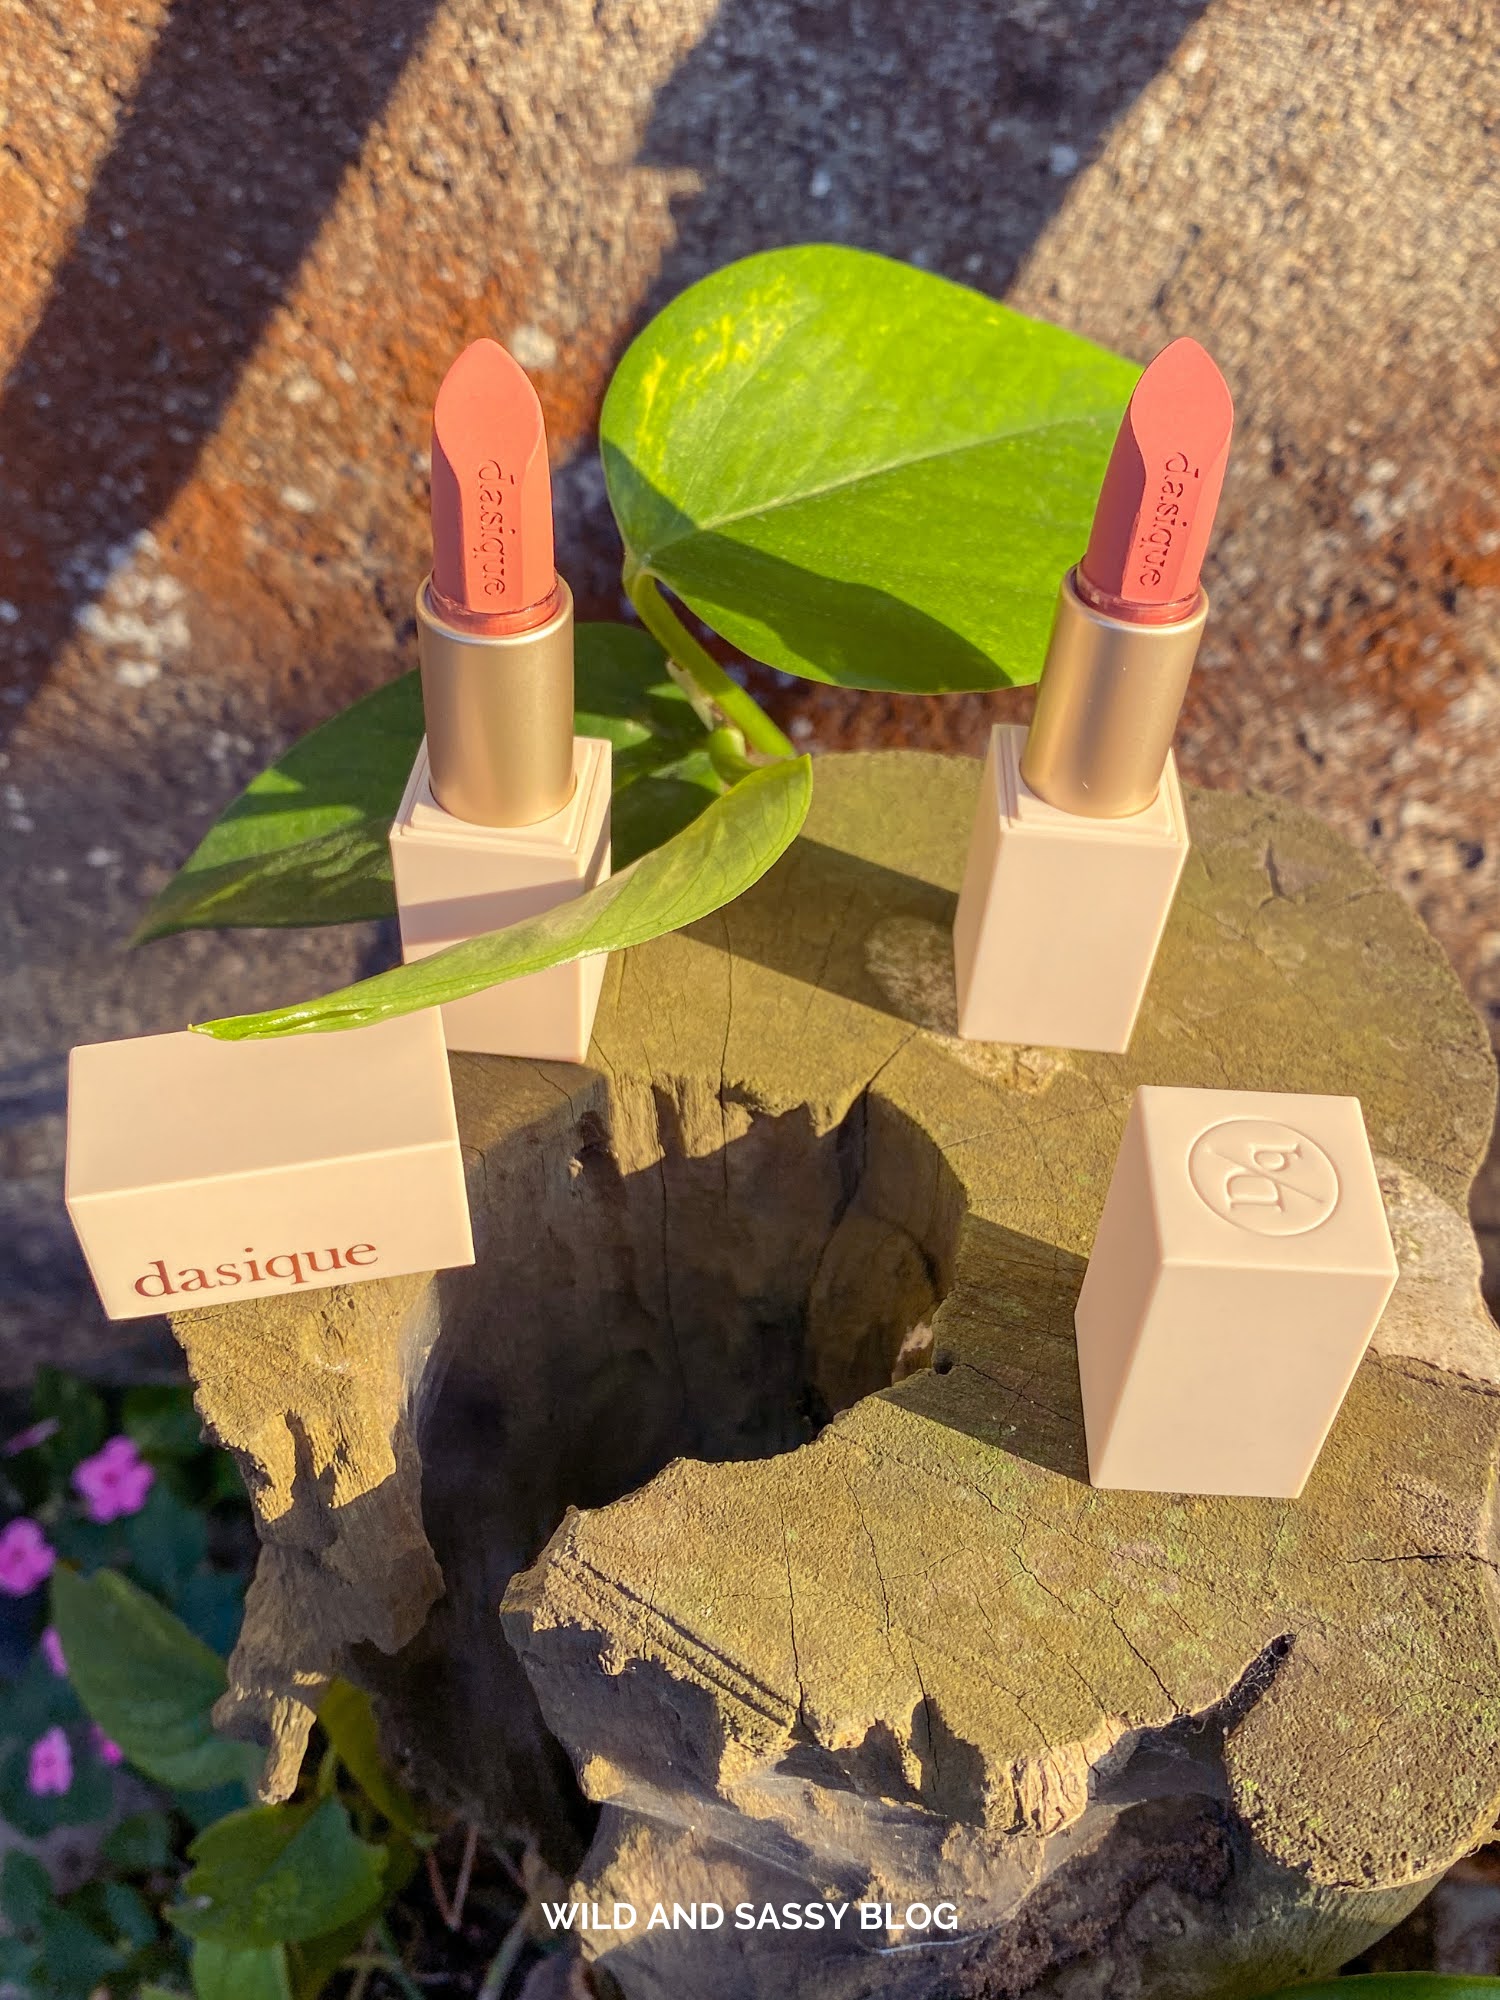 Dasique Soft Velvet Lipstick Swatches and Review